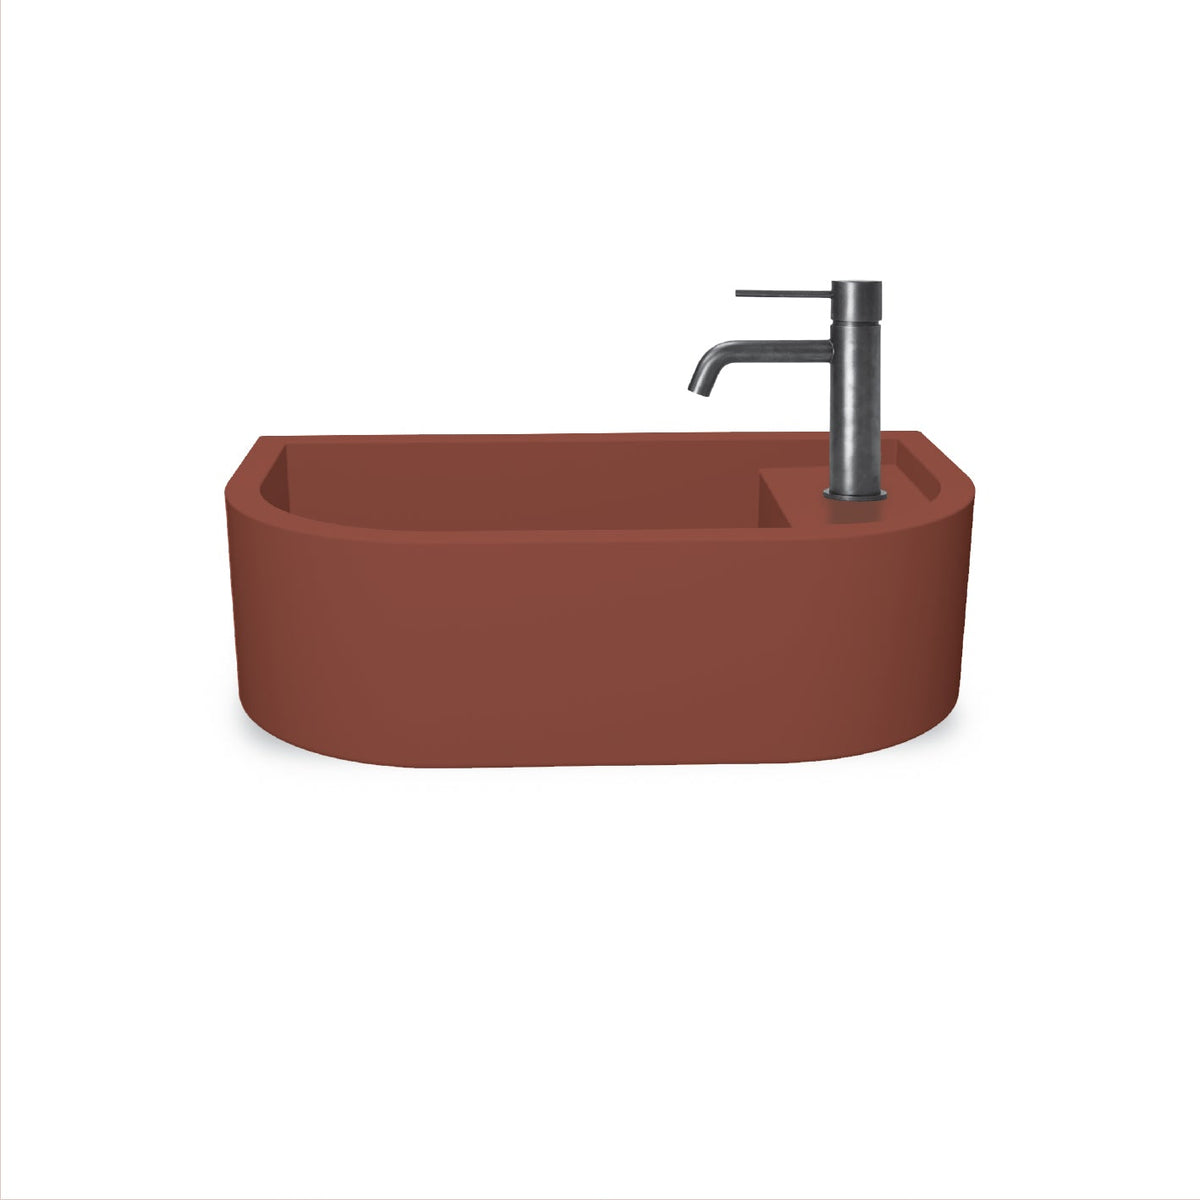 Loop 01 Basin - Overflow - Surface Mount (Clay,Tap Hole,Brass)